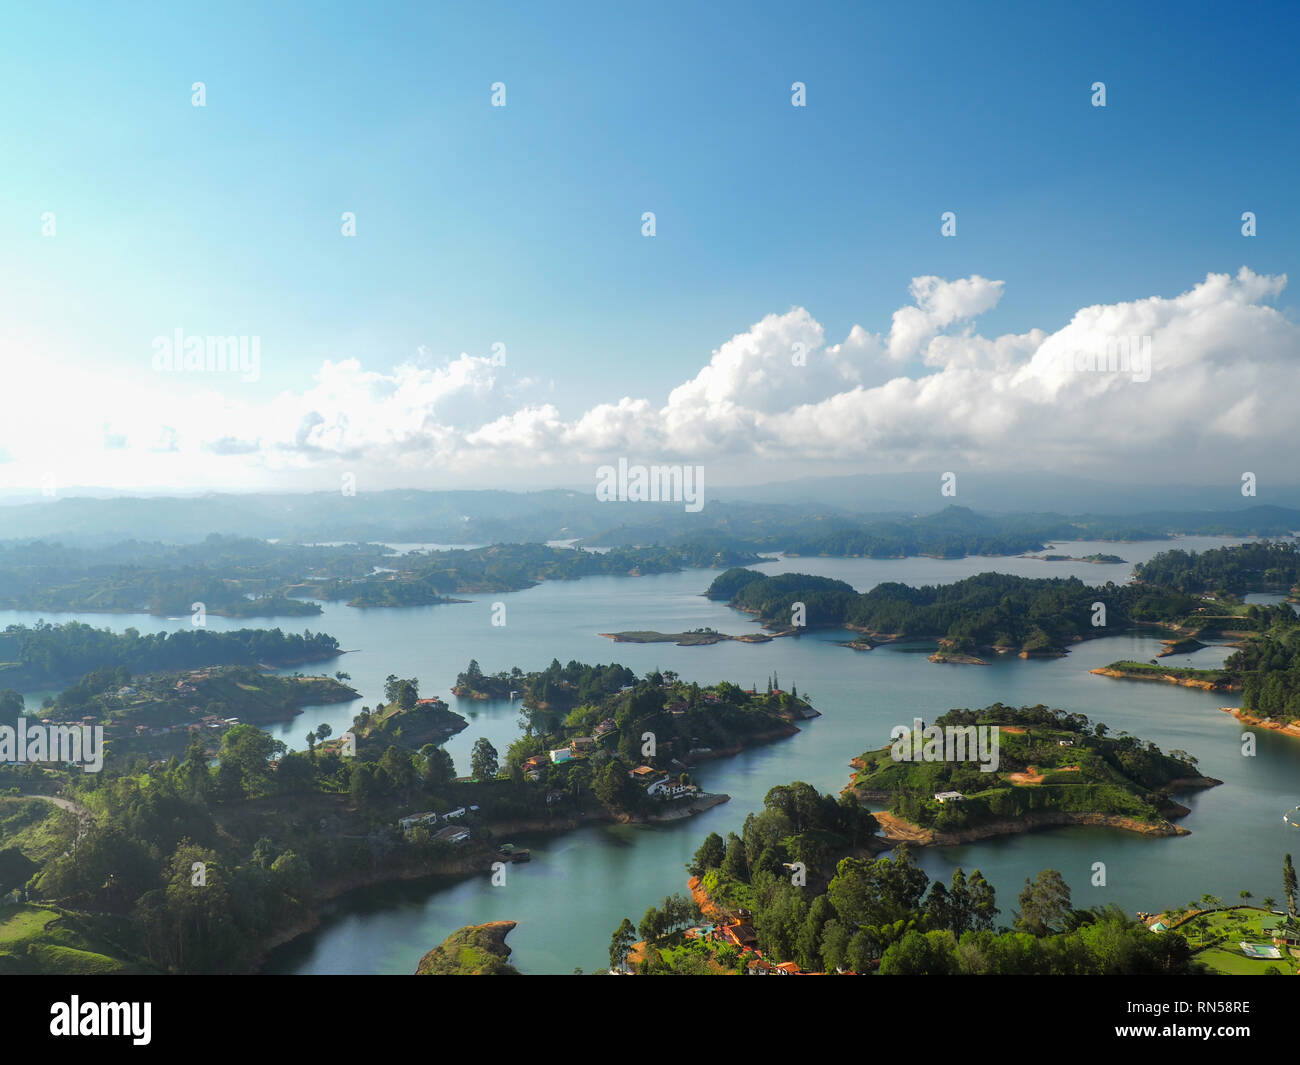 Overlooking the lakes of Guatapé, Colombia Stock Photo